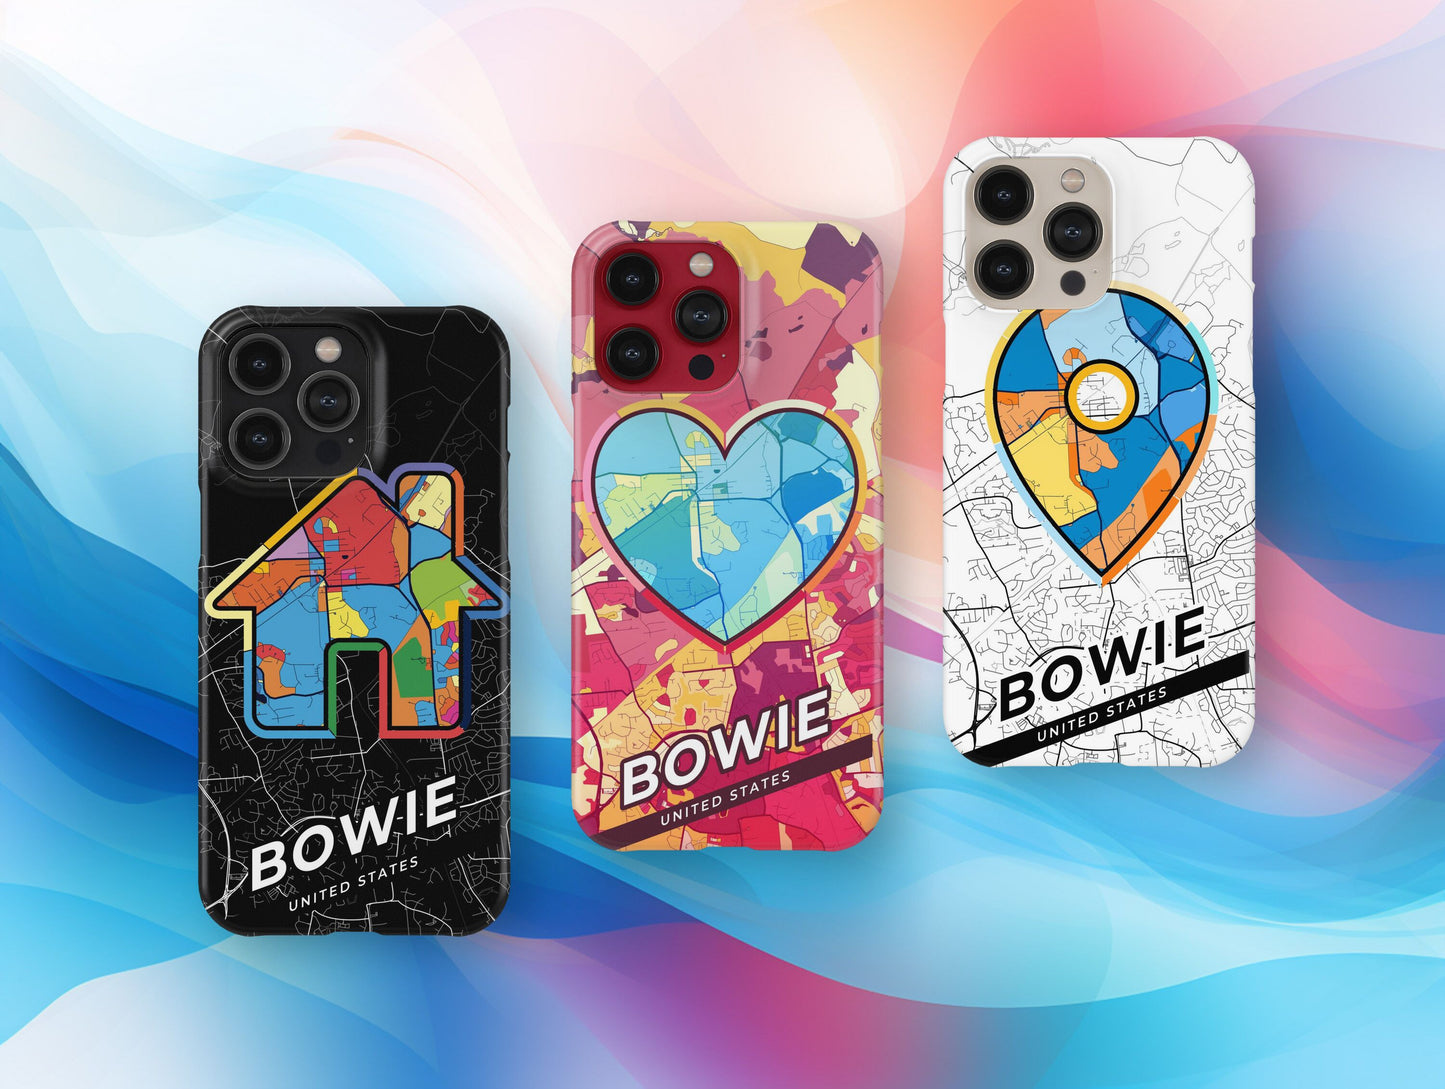 Bowie Maryland slim phone case with colorful icon. Birthday, wedding or housewarming gift. Couple match cases.